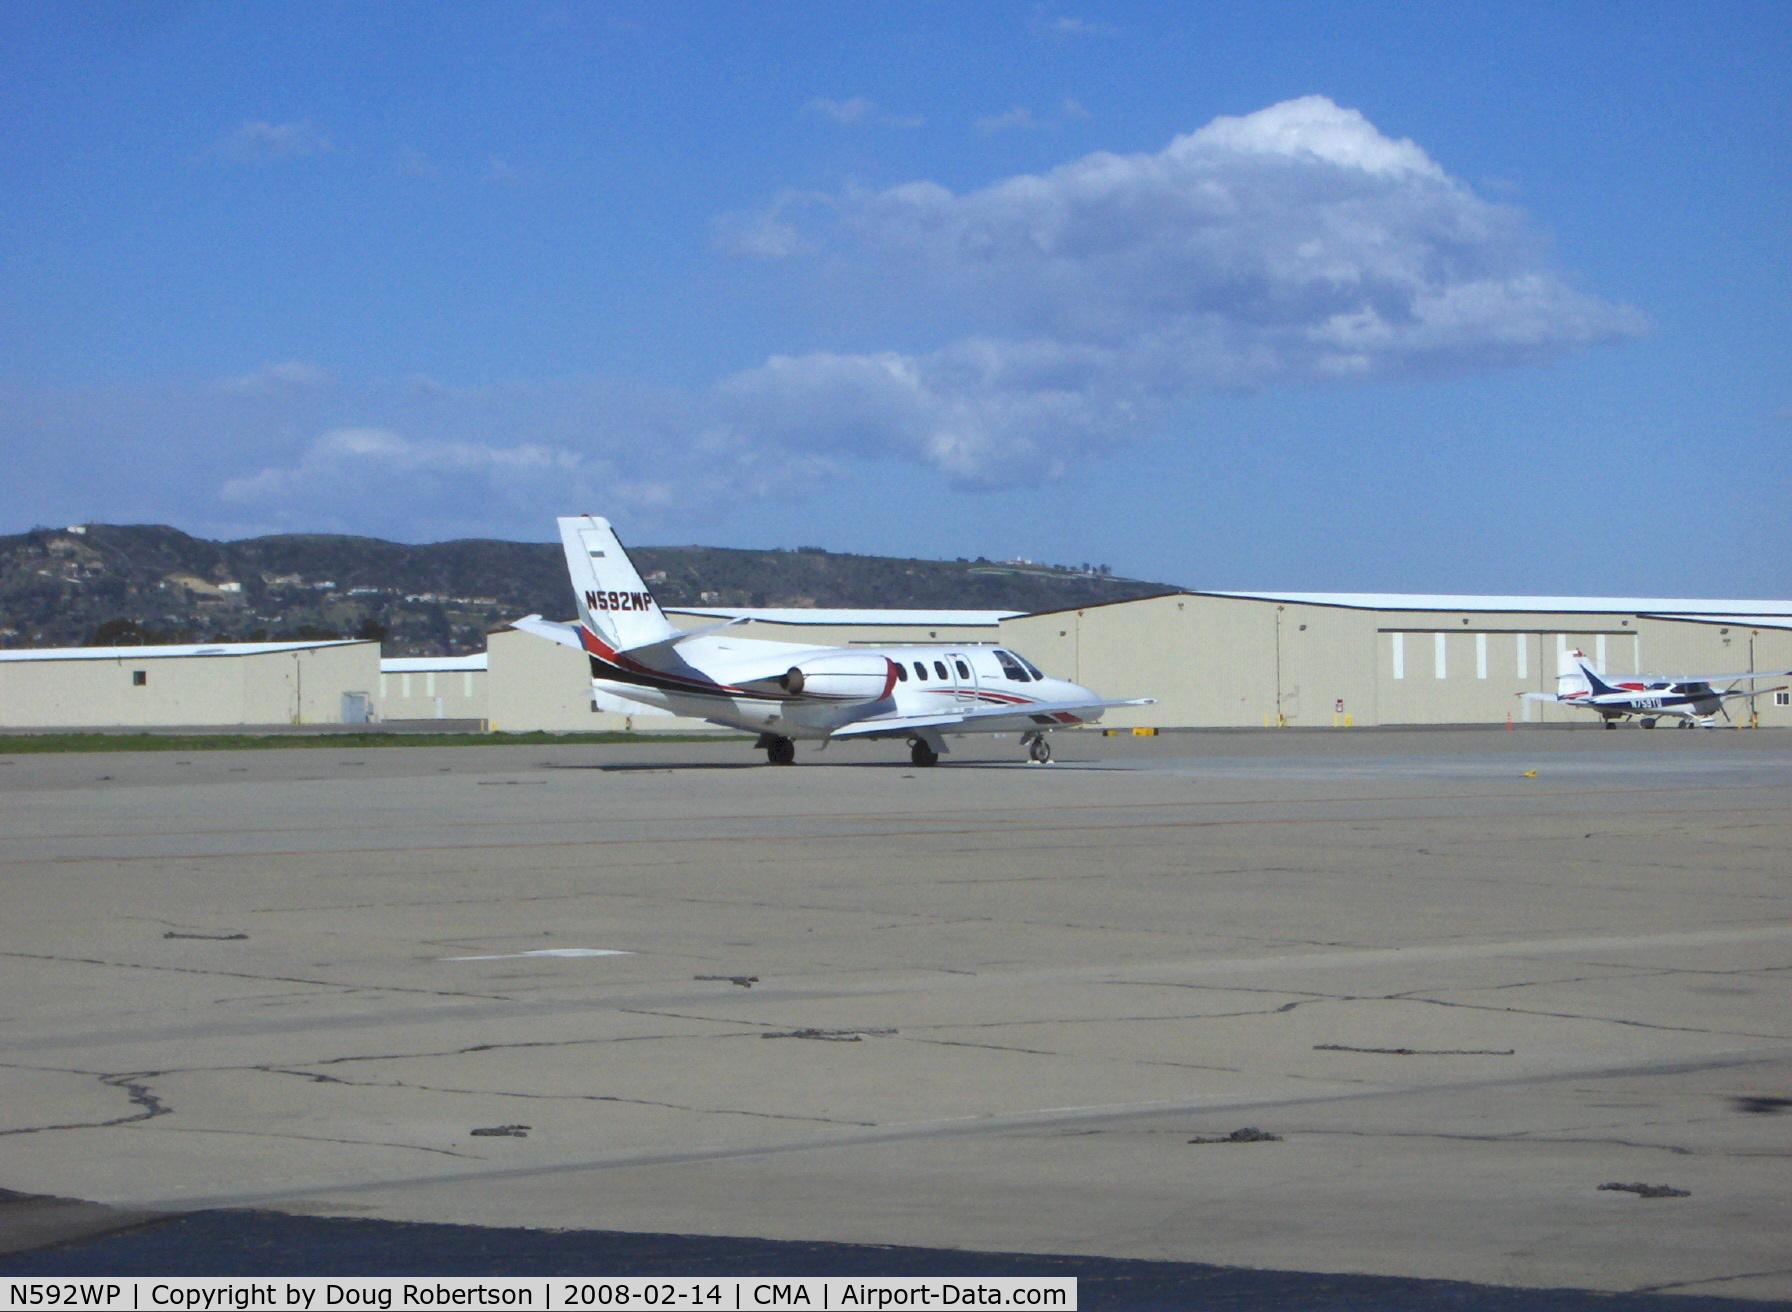 N592WP, 1975 Cessna 500 Citation I C/N 500-0253, 1975 Cessna CITATION 500, two P&W Canada JT15D-1 Turbofans rated 2,200 lb st each for takeoff